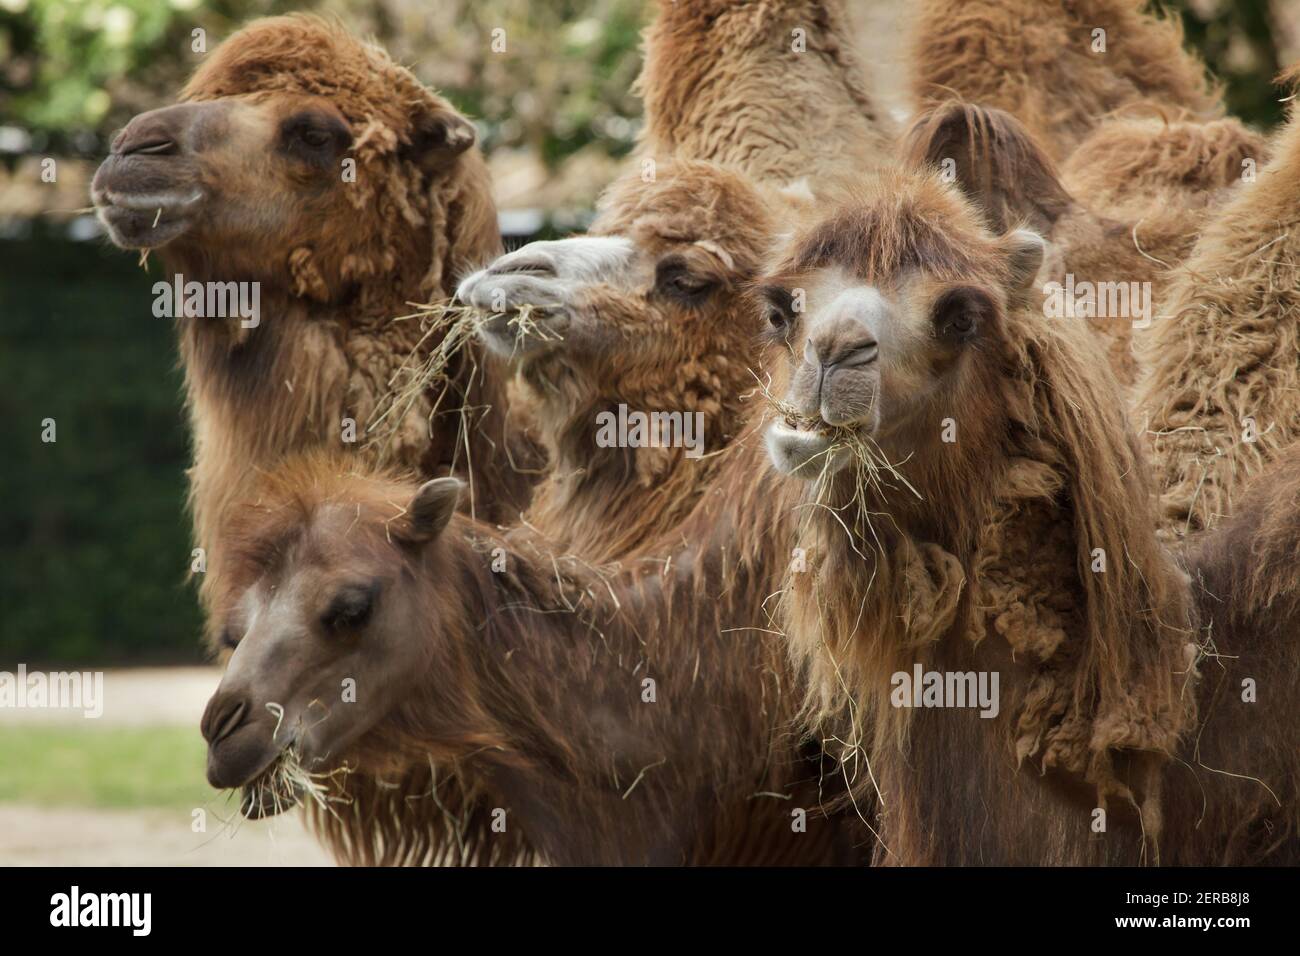 Bactrian camels (Camelus bactrianus). Domesticated animals. Stock Photo